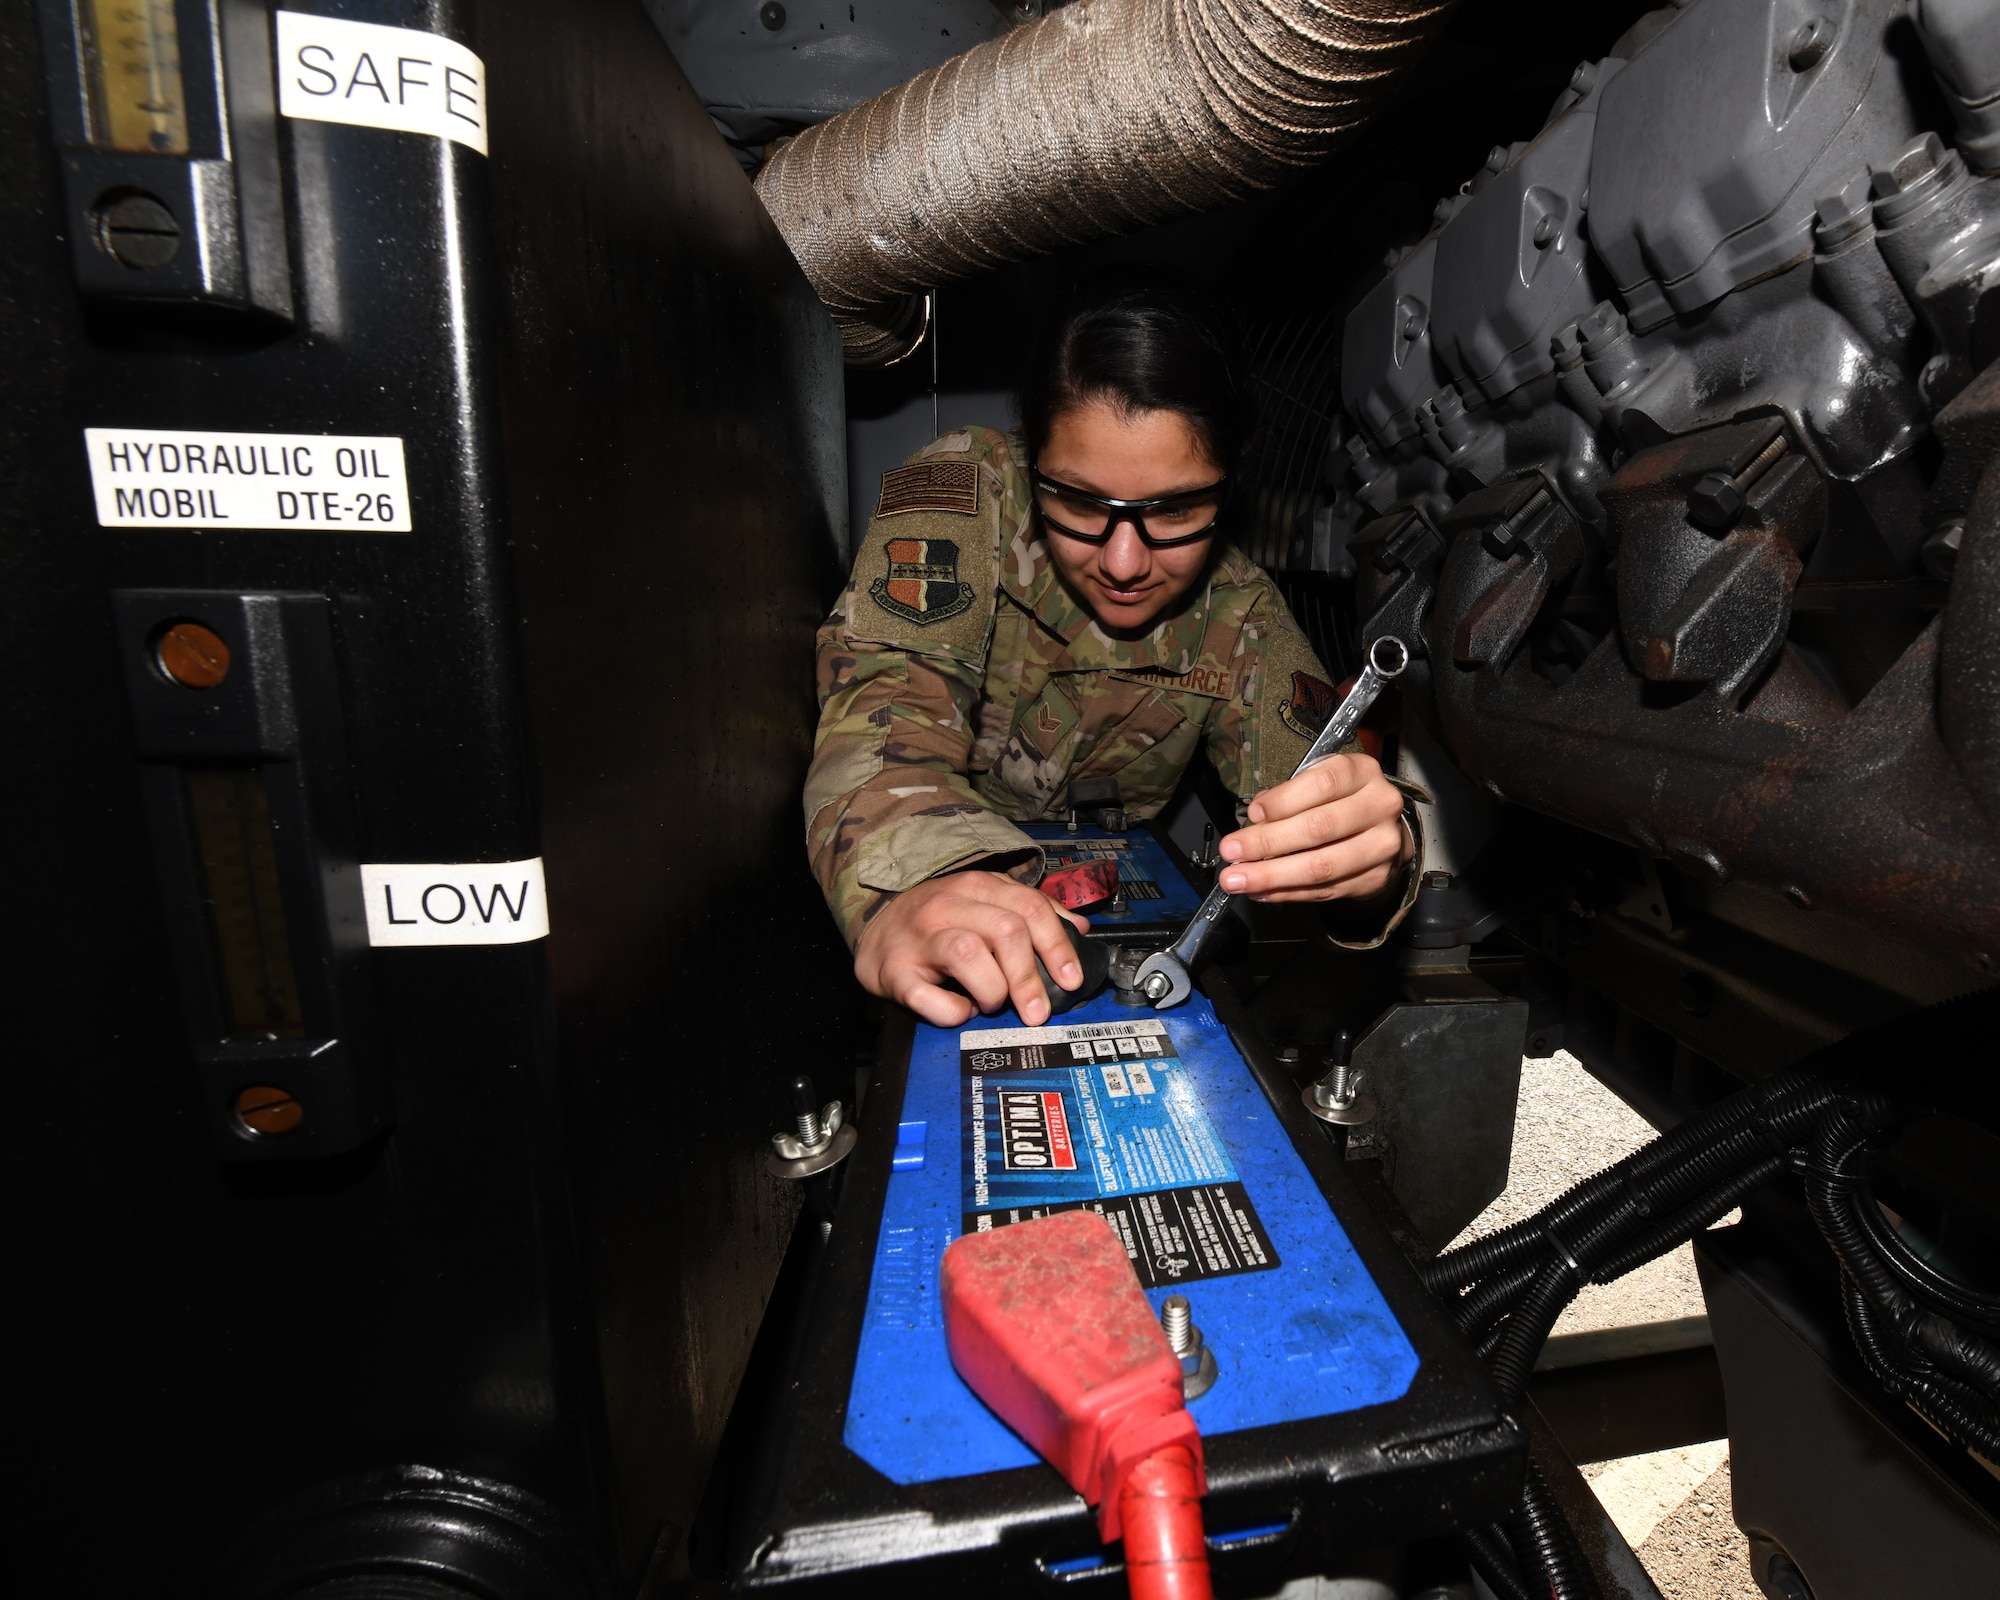 Senior Airman Sierra Garcia, 9th Maintenance Squadron aerospace ground equipment apprentice, tightens a nut on the battery of a TLD air conditioning unit, Jan. 7, 2020 at Beale Air Force Base, California. The 9th MXS AGE flight inspects, repairs, modifies, and delivers over 500 pieces of equipment worth around $23 million. (U.S. Air Force photo by Airman 1st Class Luis A. Ruiz-Vazquez)